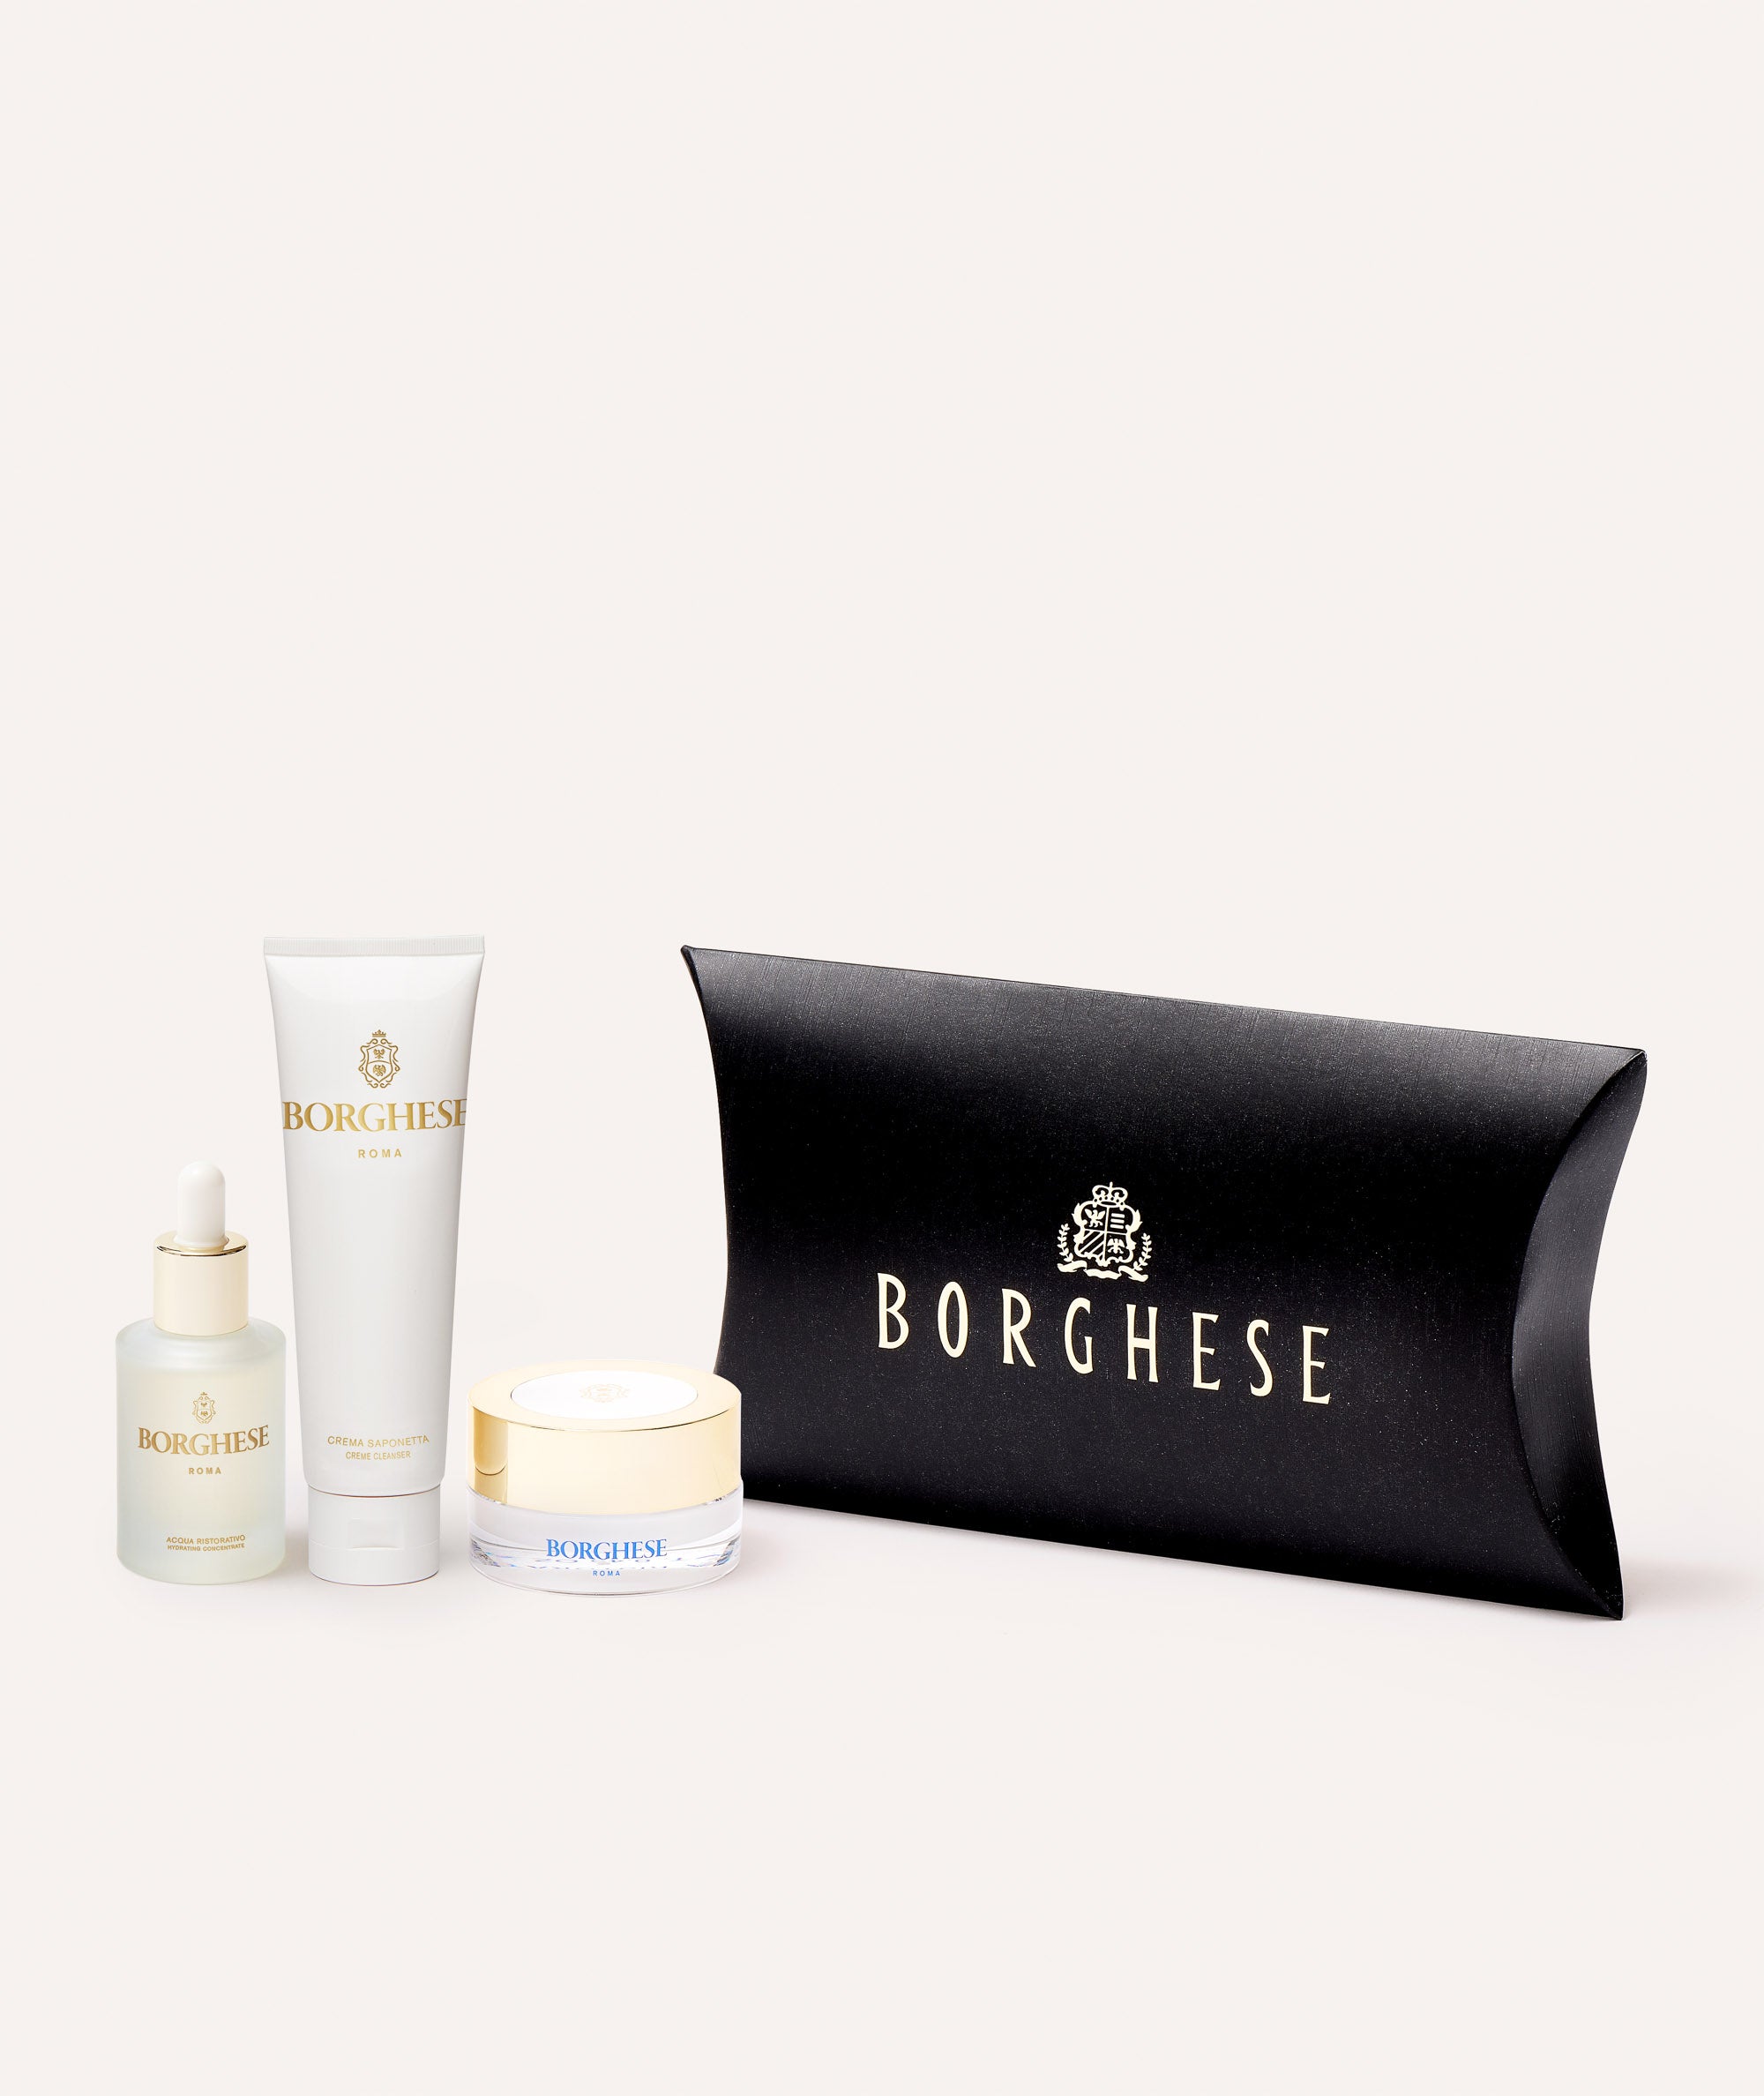 Picture of the Borghese 3-Step Skincare Regimen Gift Set contents and gift box